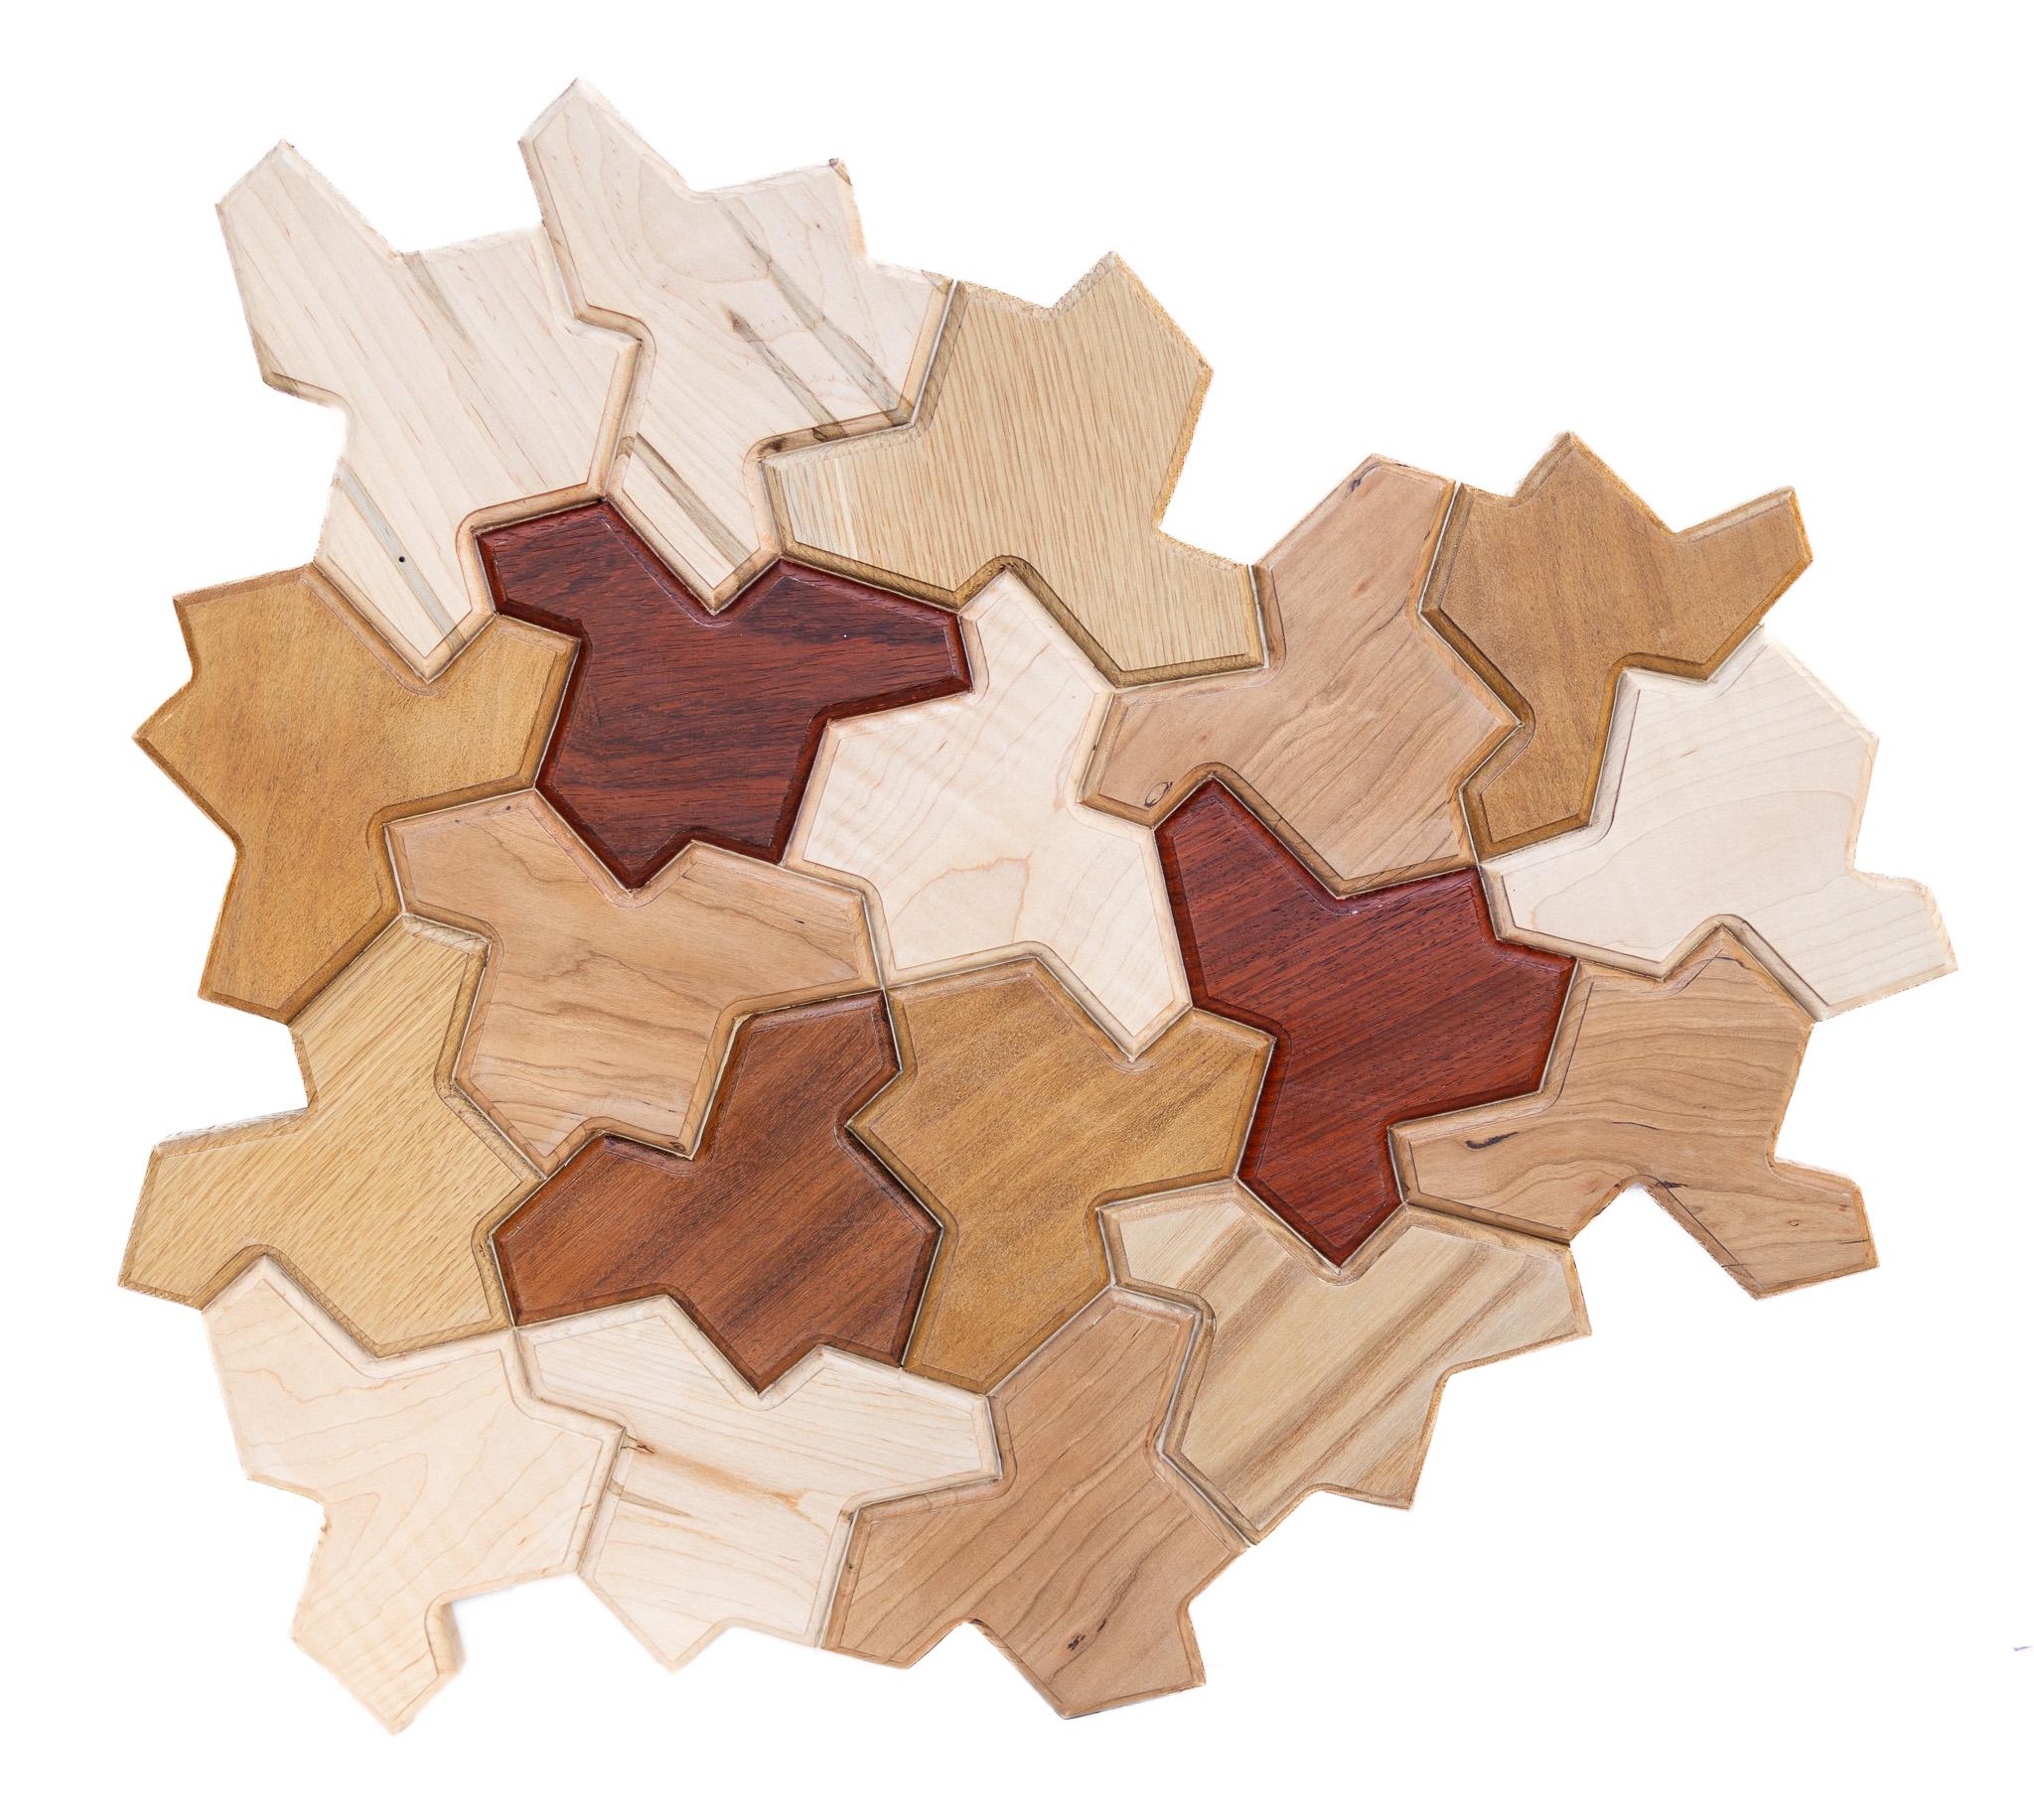 "Hats" by Heiko Weiner represents an intersection between art and mathematics. This abstract wall sculpture utilizes  a 13 sided shape known as "The Hat," discovered by mathematician David Smith in 2022. Tiles cut in this shape can be used to cover